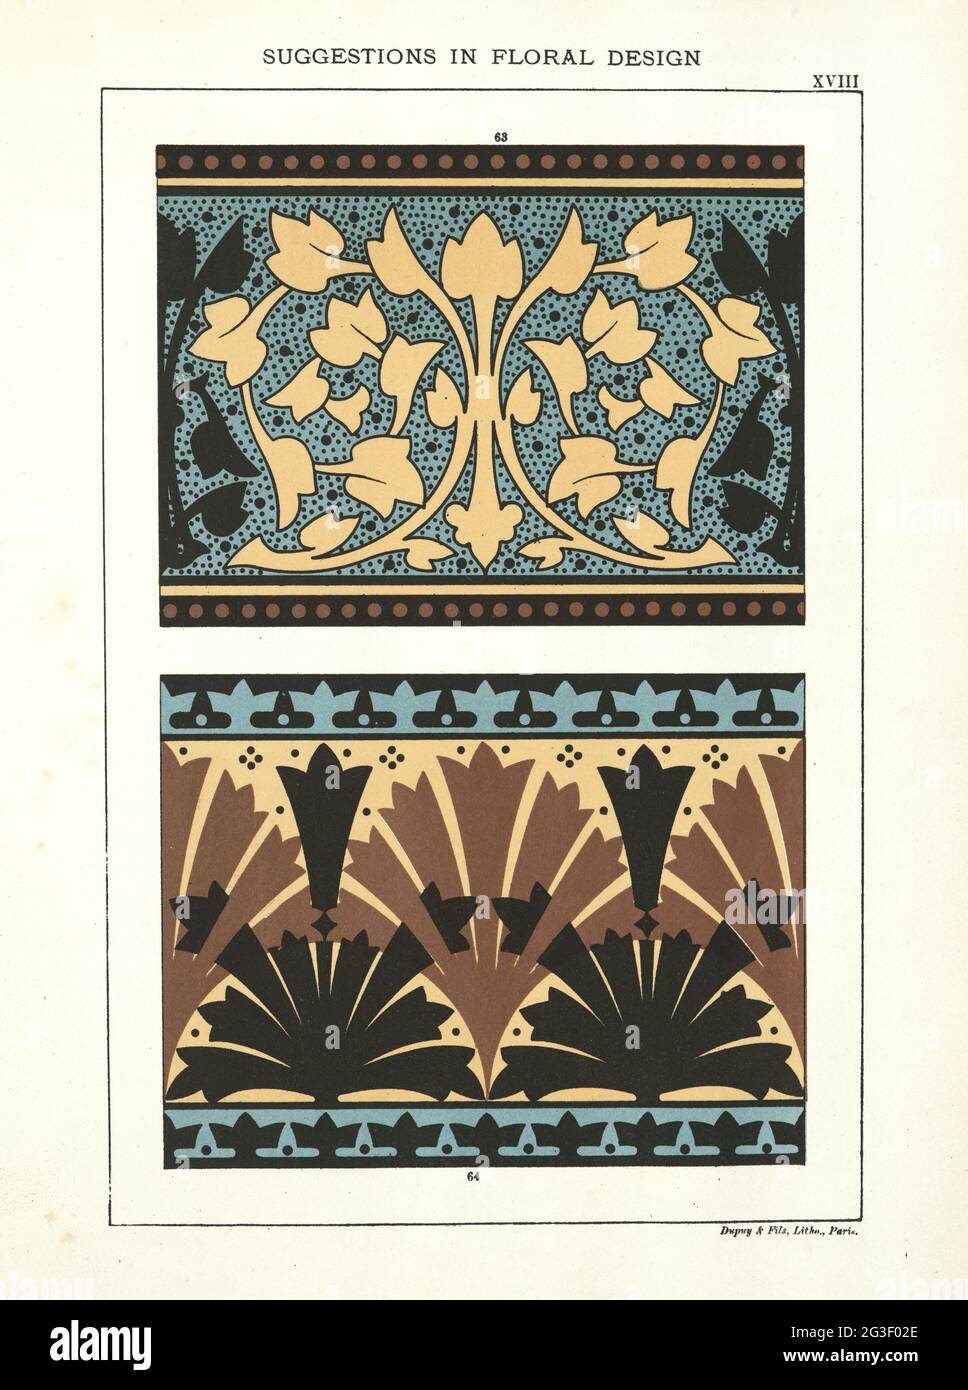 Victorian suggestions in floral design, 19th Century, leaf pattern Stock Photo